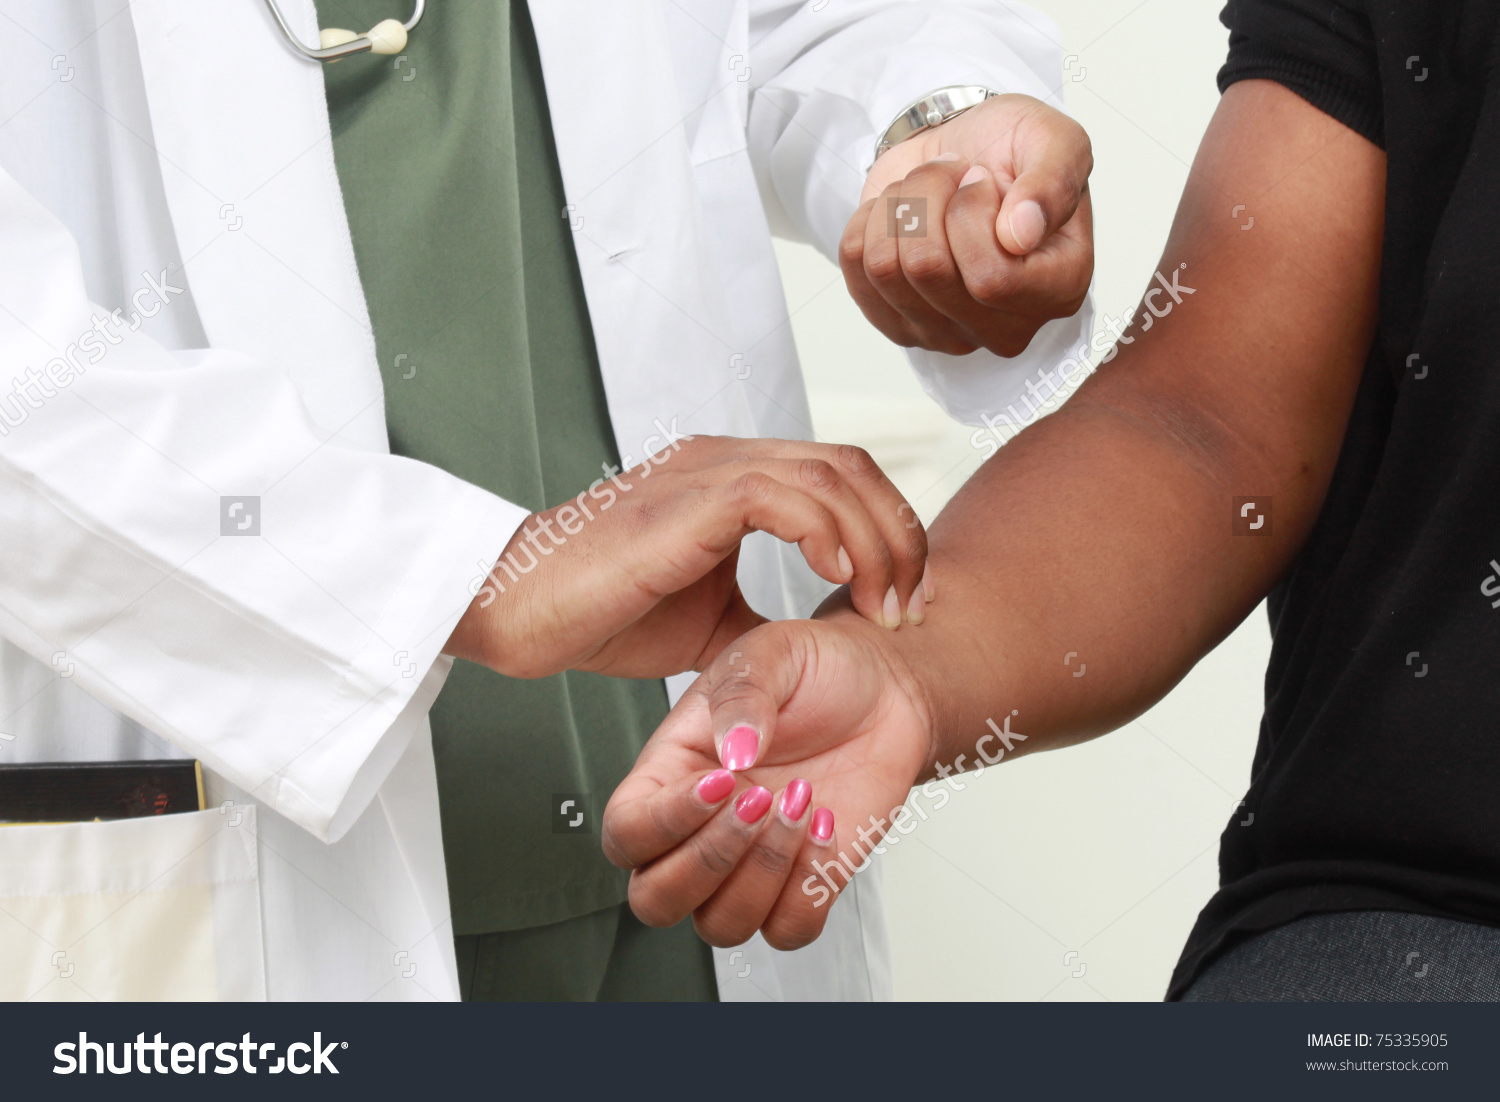 stock-photo-doctor-checking-on-a-patient-75335905